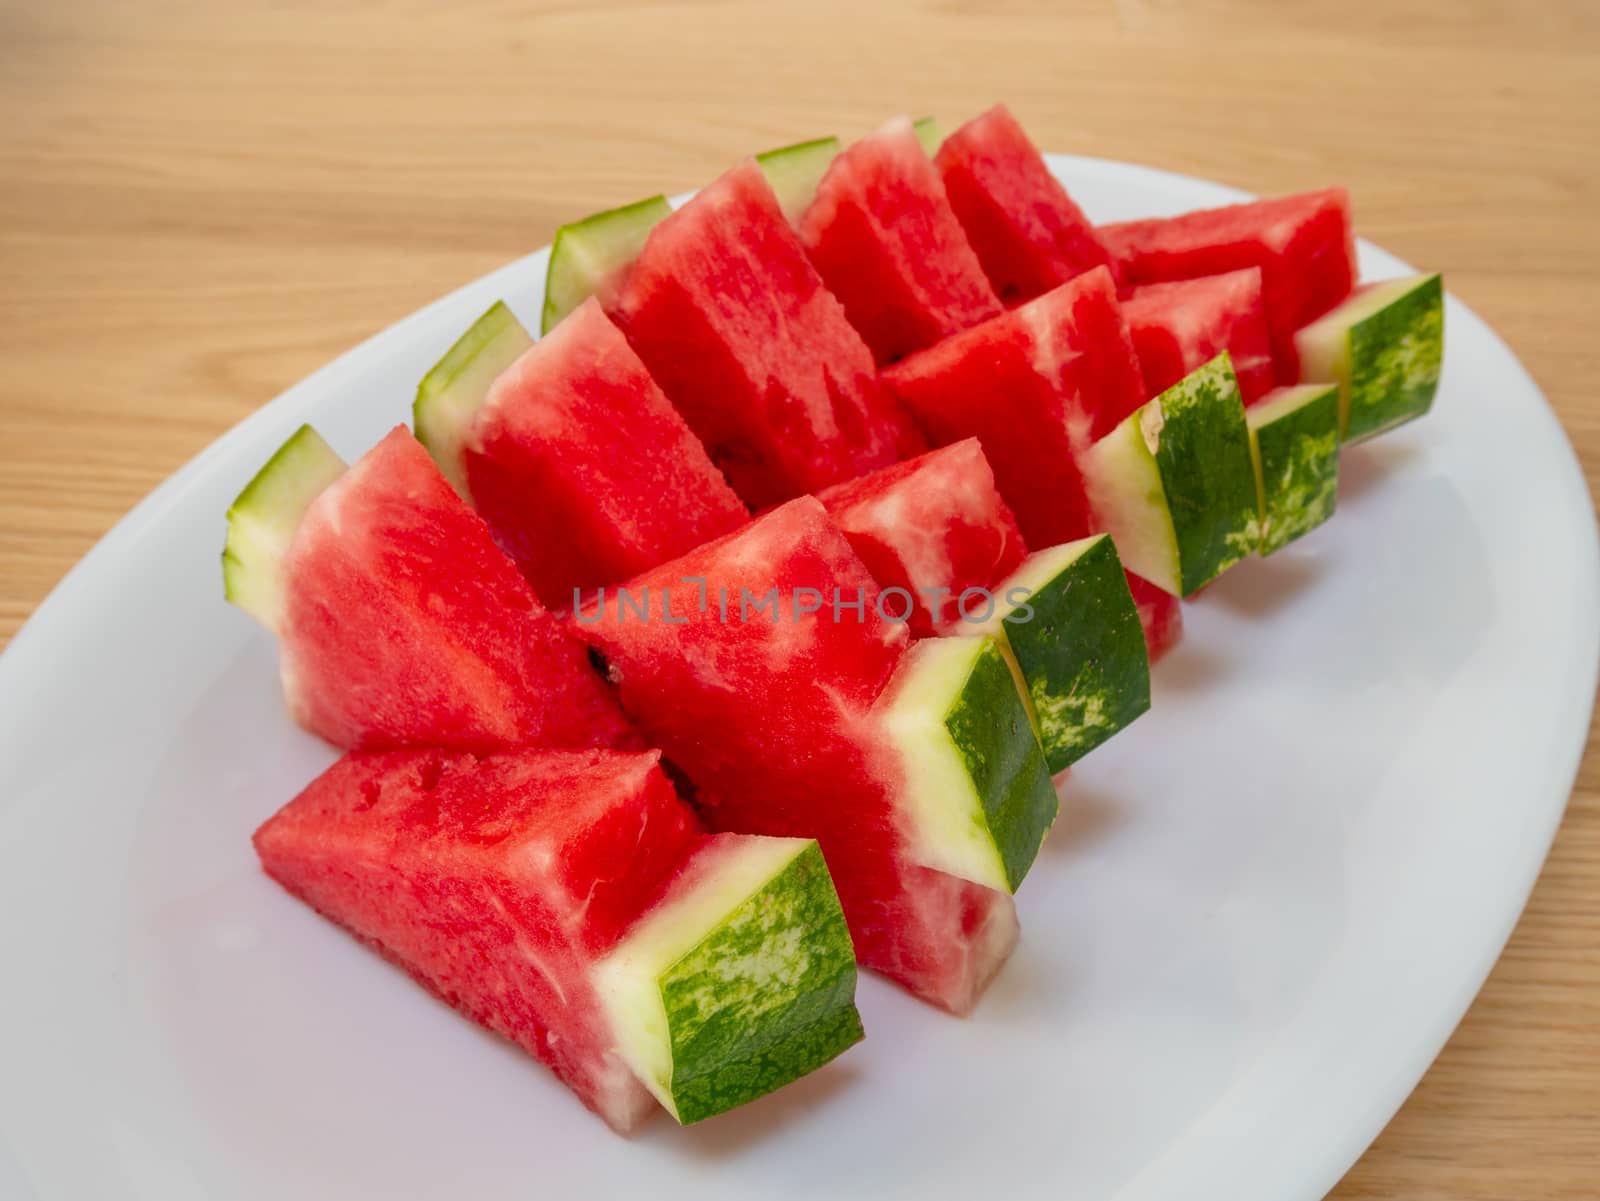 Slices of a ripe watermelon on a plate by Amankris